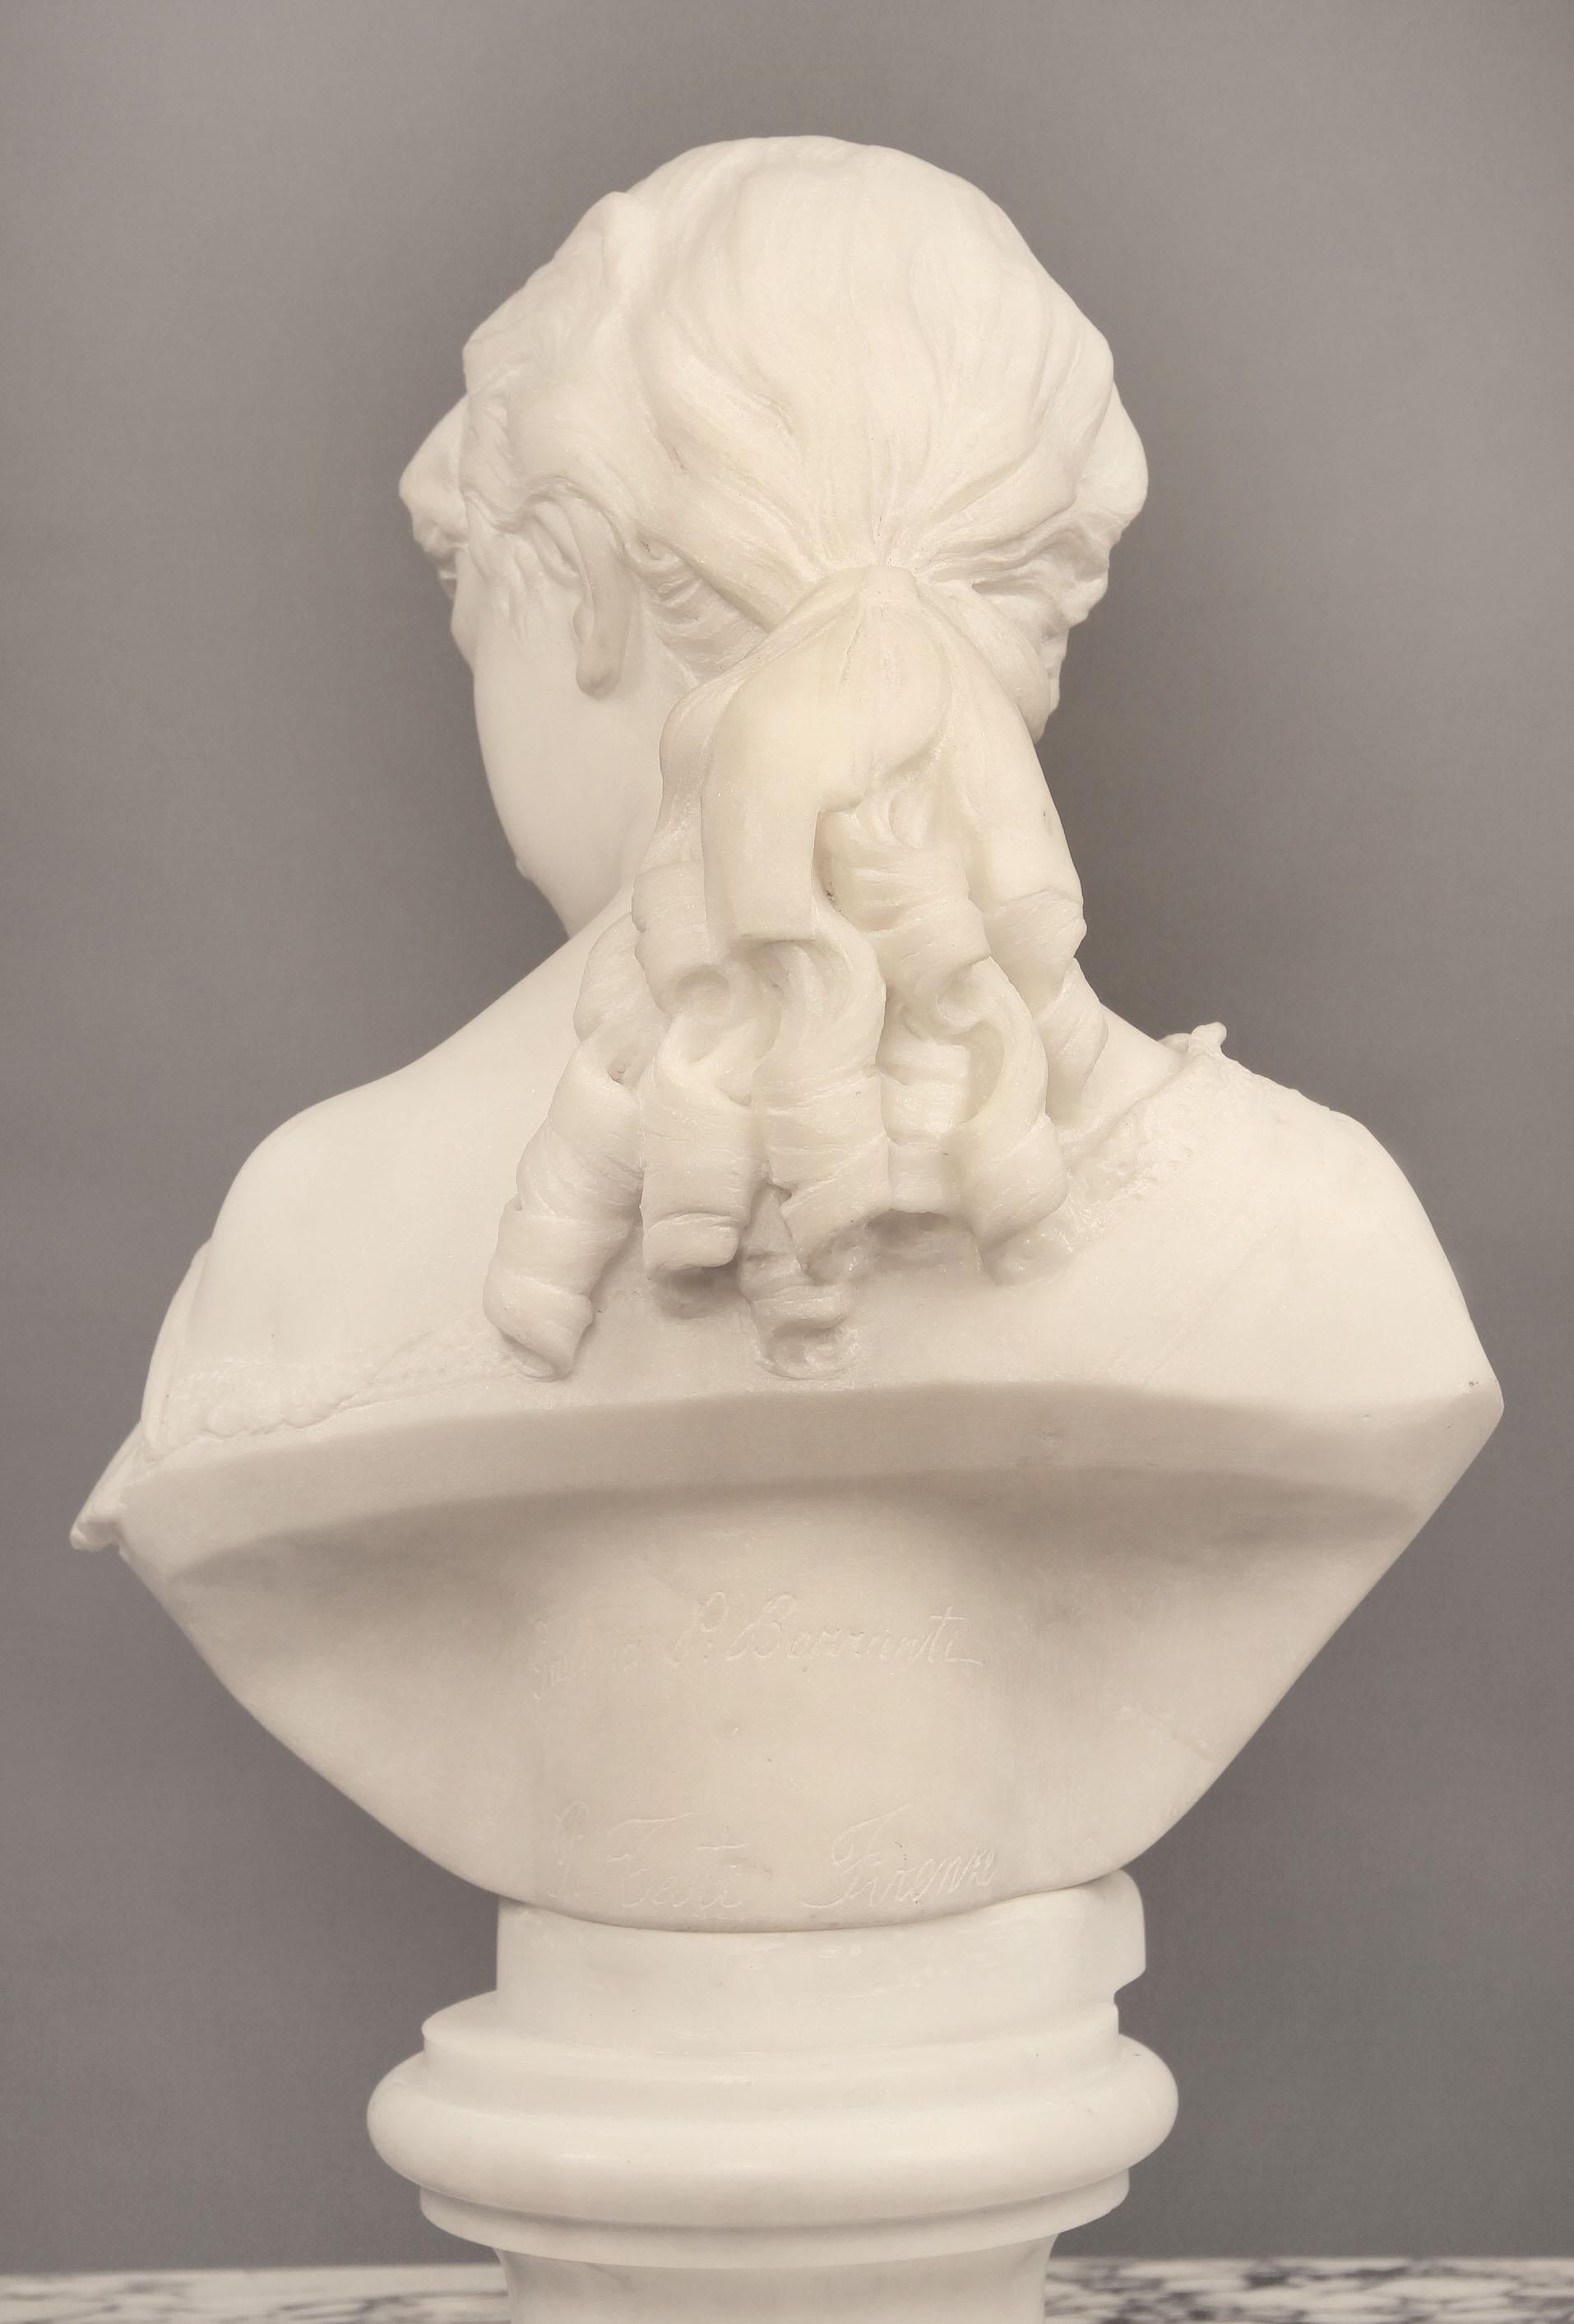 Hand-Carved 19th Century Italian White Carrara Marble Bust of a Woman - Pietro Bazzanti For Sale